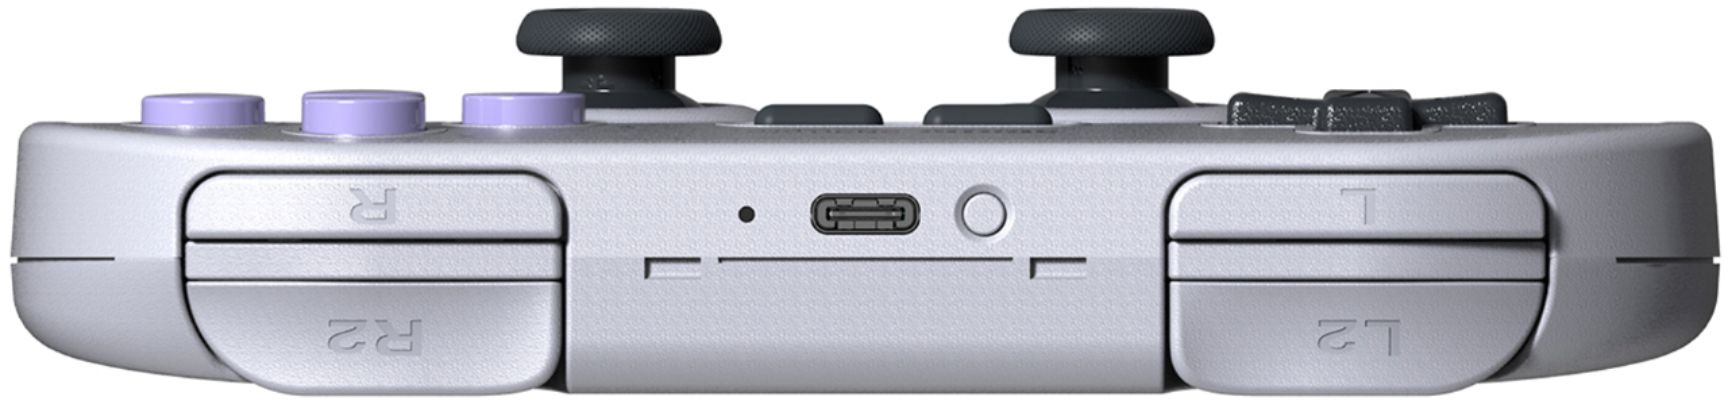 Back View: 8BitDo - SN30 Pro Wireless Controller for PC, Mac, Android, and Nintendo Switch - Gray